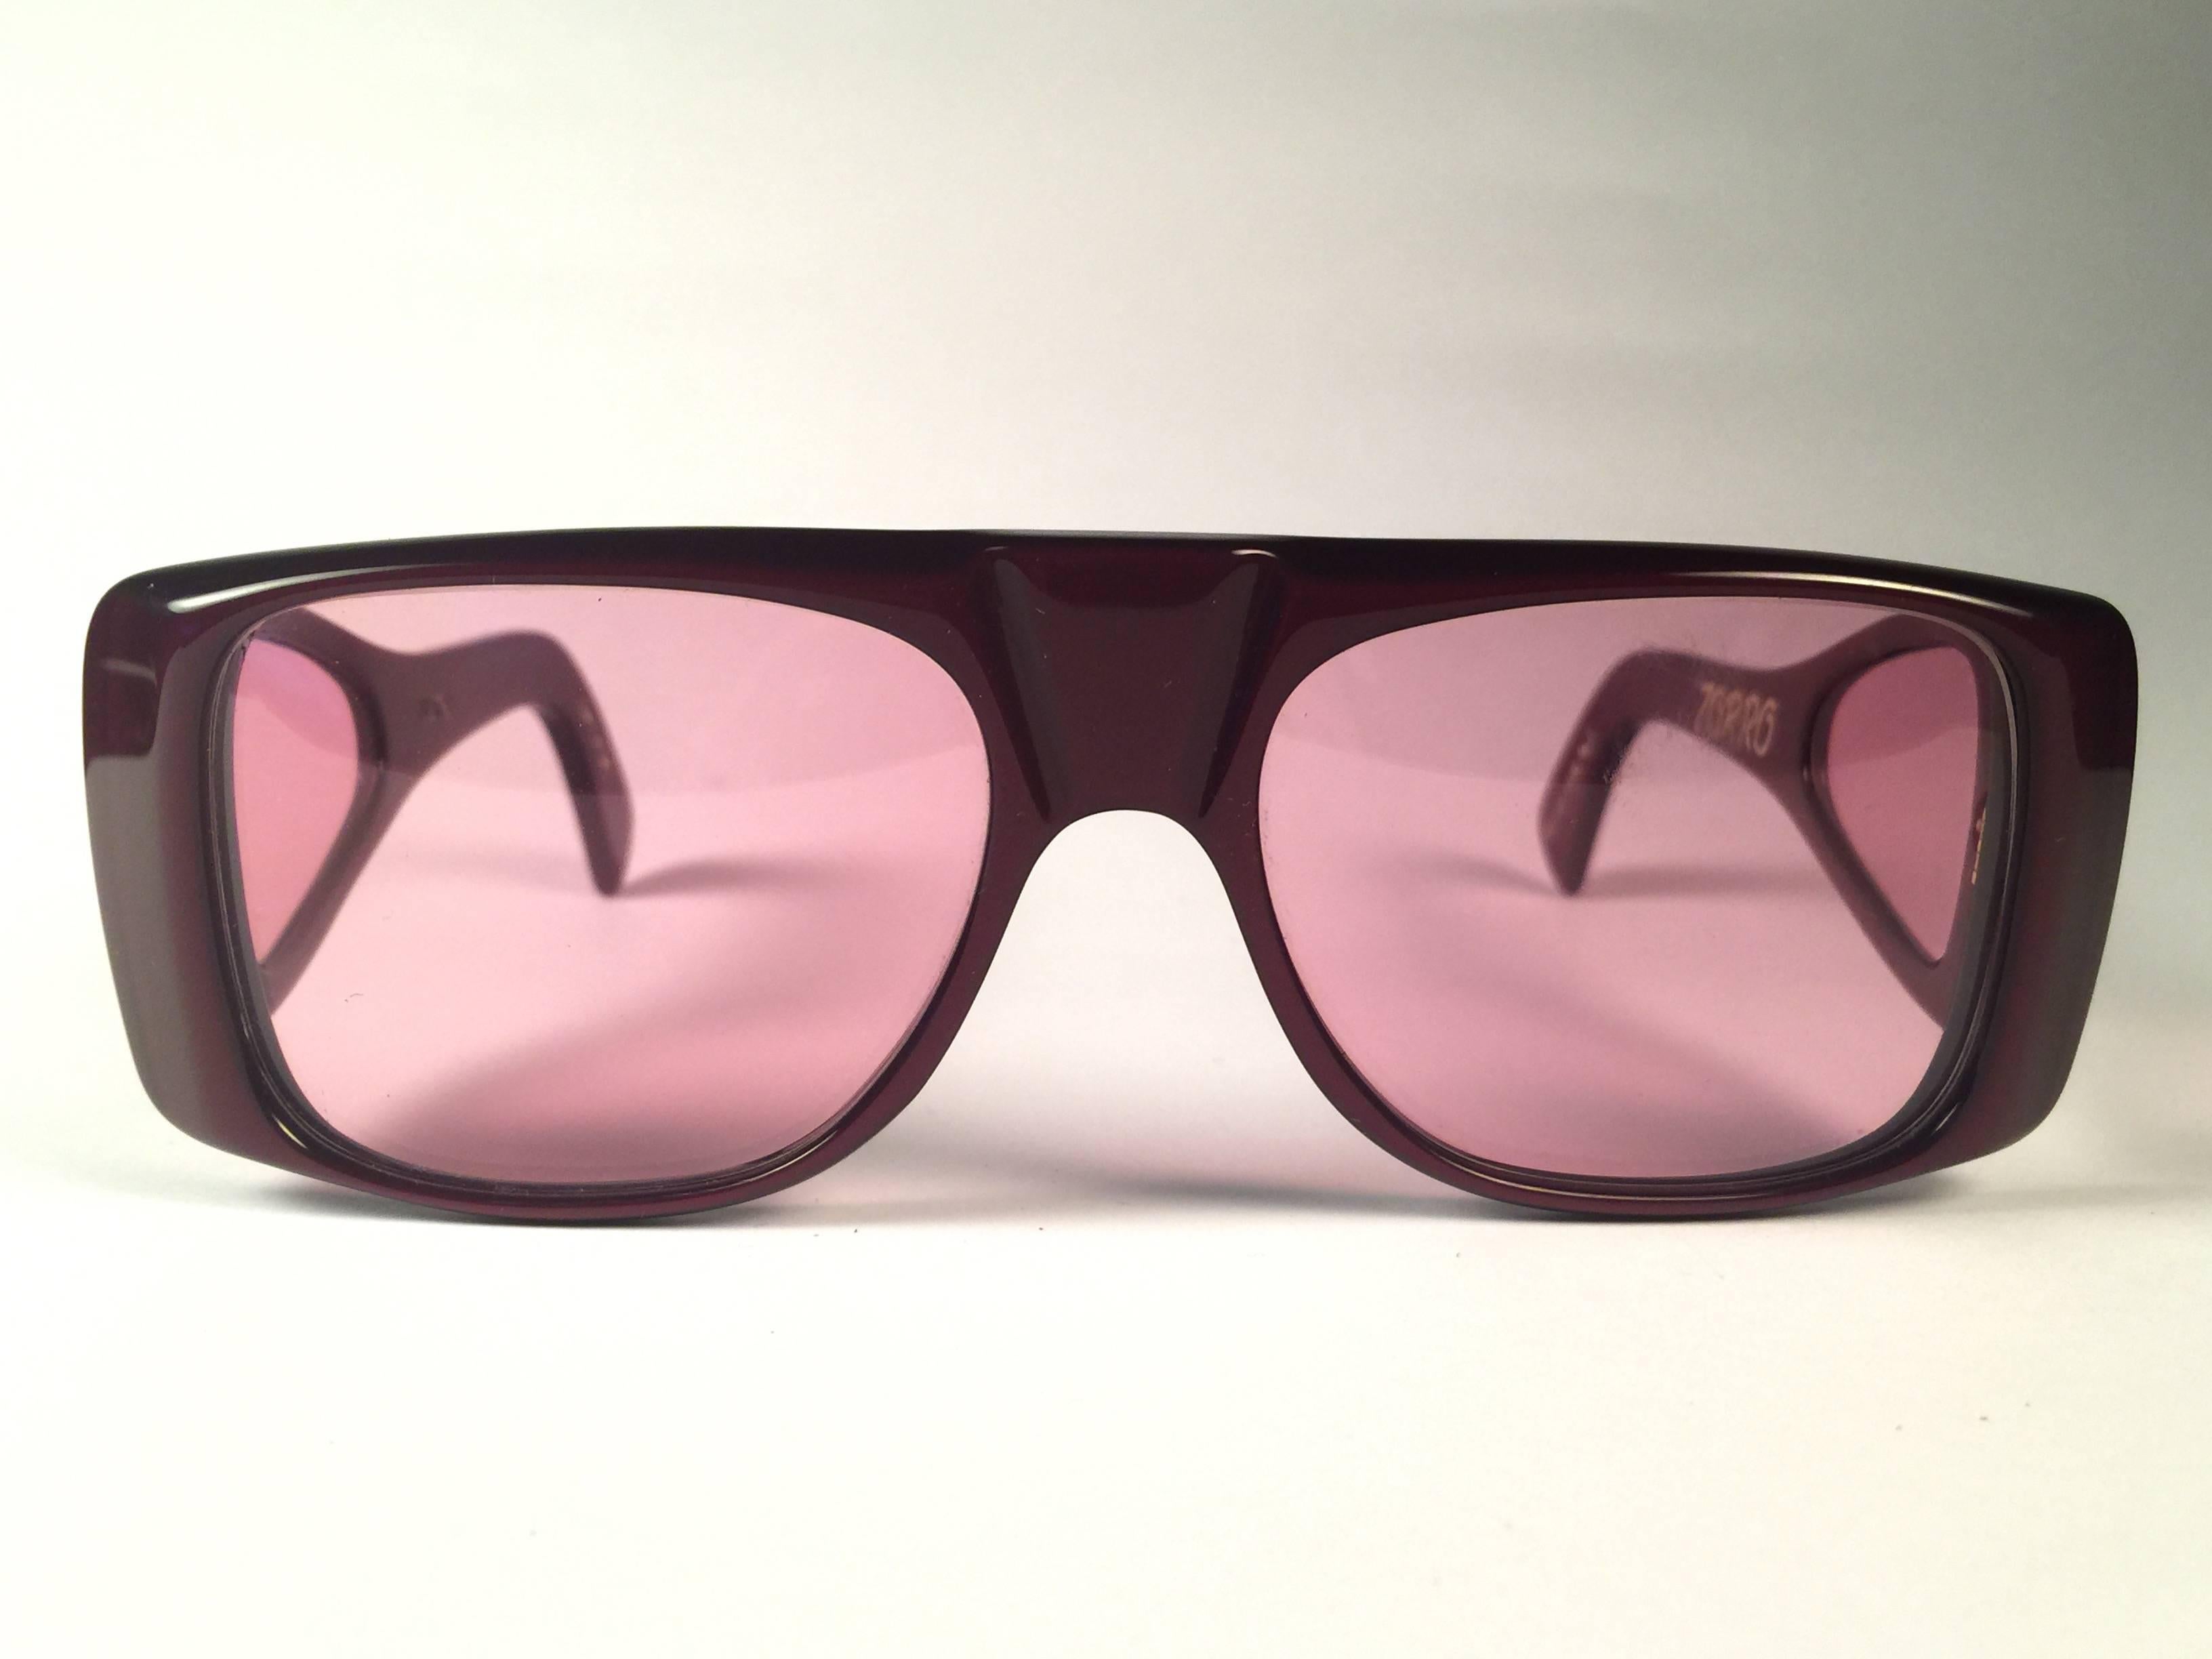 New Vintage Ultra " Zorro " in burgundy sunglasses. Cut out frame sporting a pair of rose lenses.

Never worn or displayed. This item may show minor sign of wear due to nearly 40 years of storage.

Designed and produced in England.